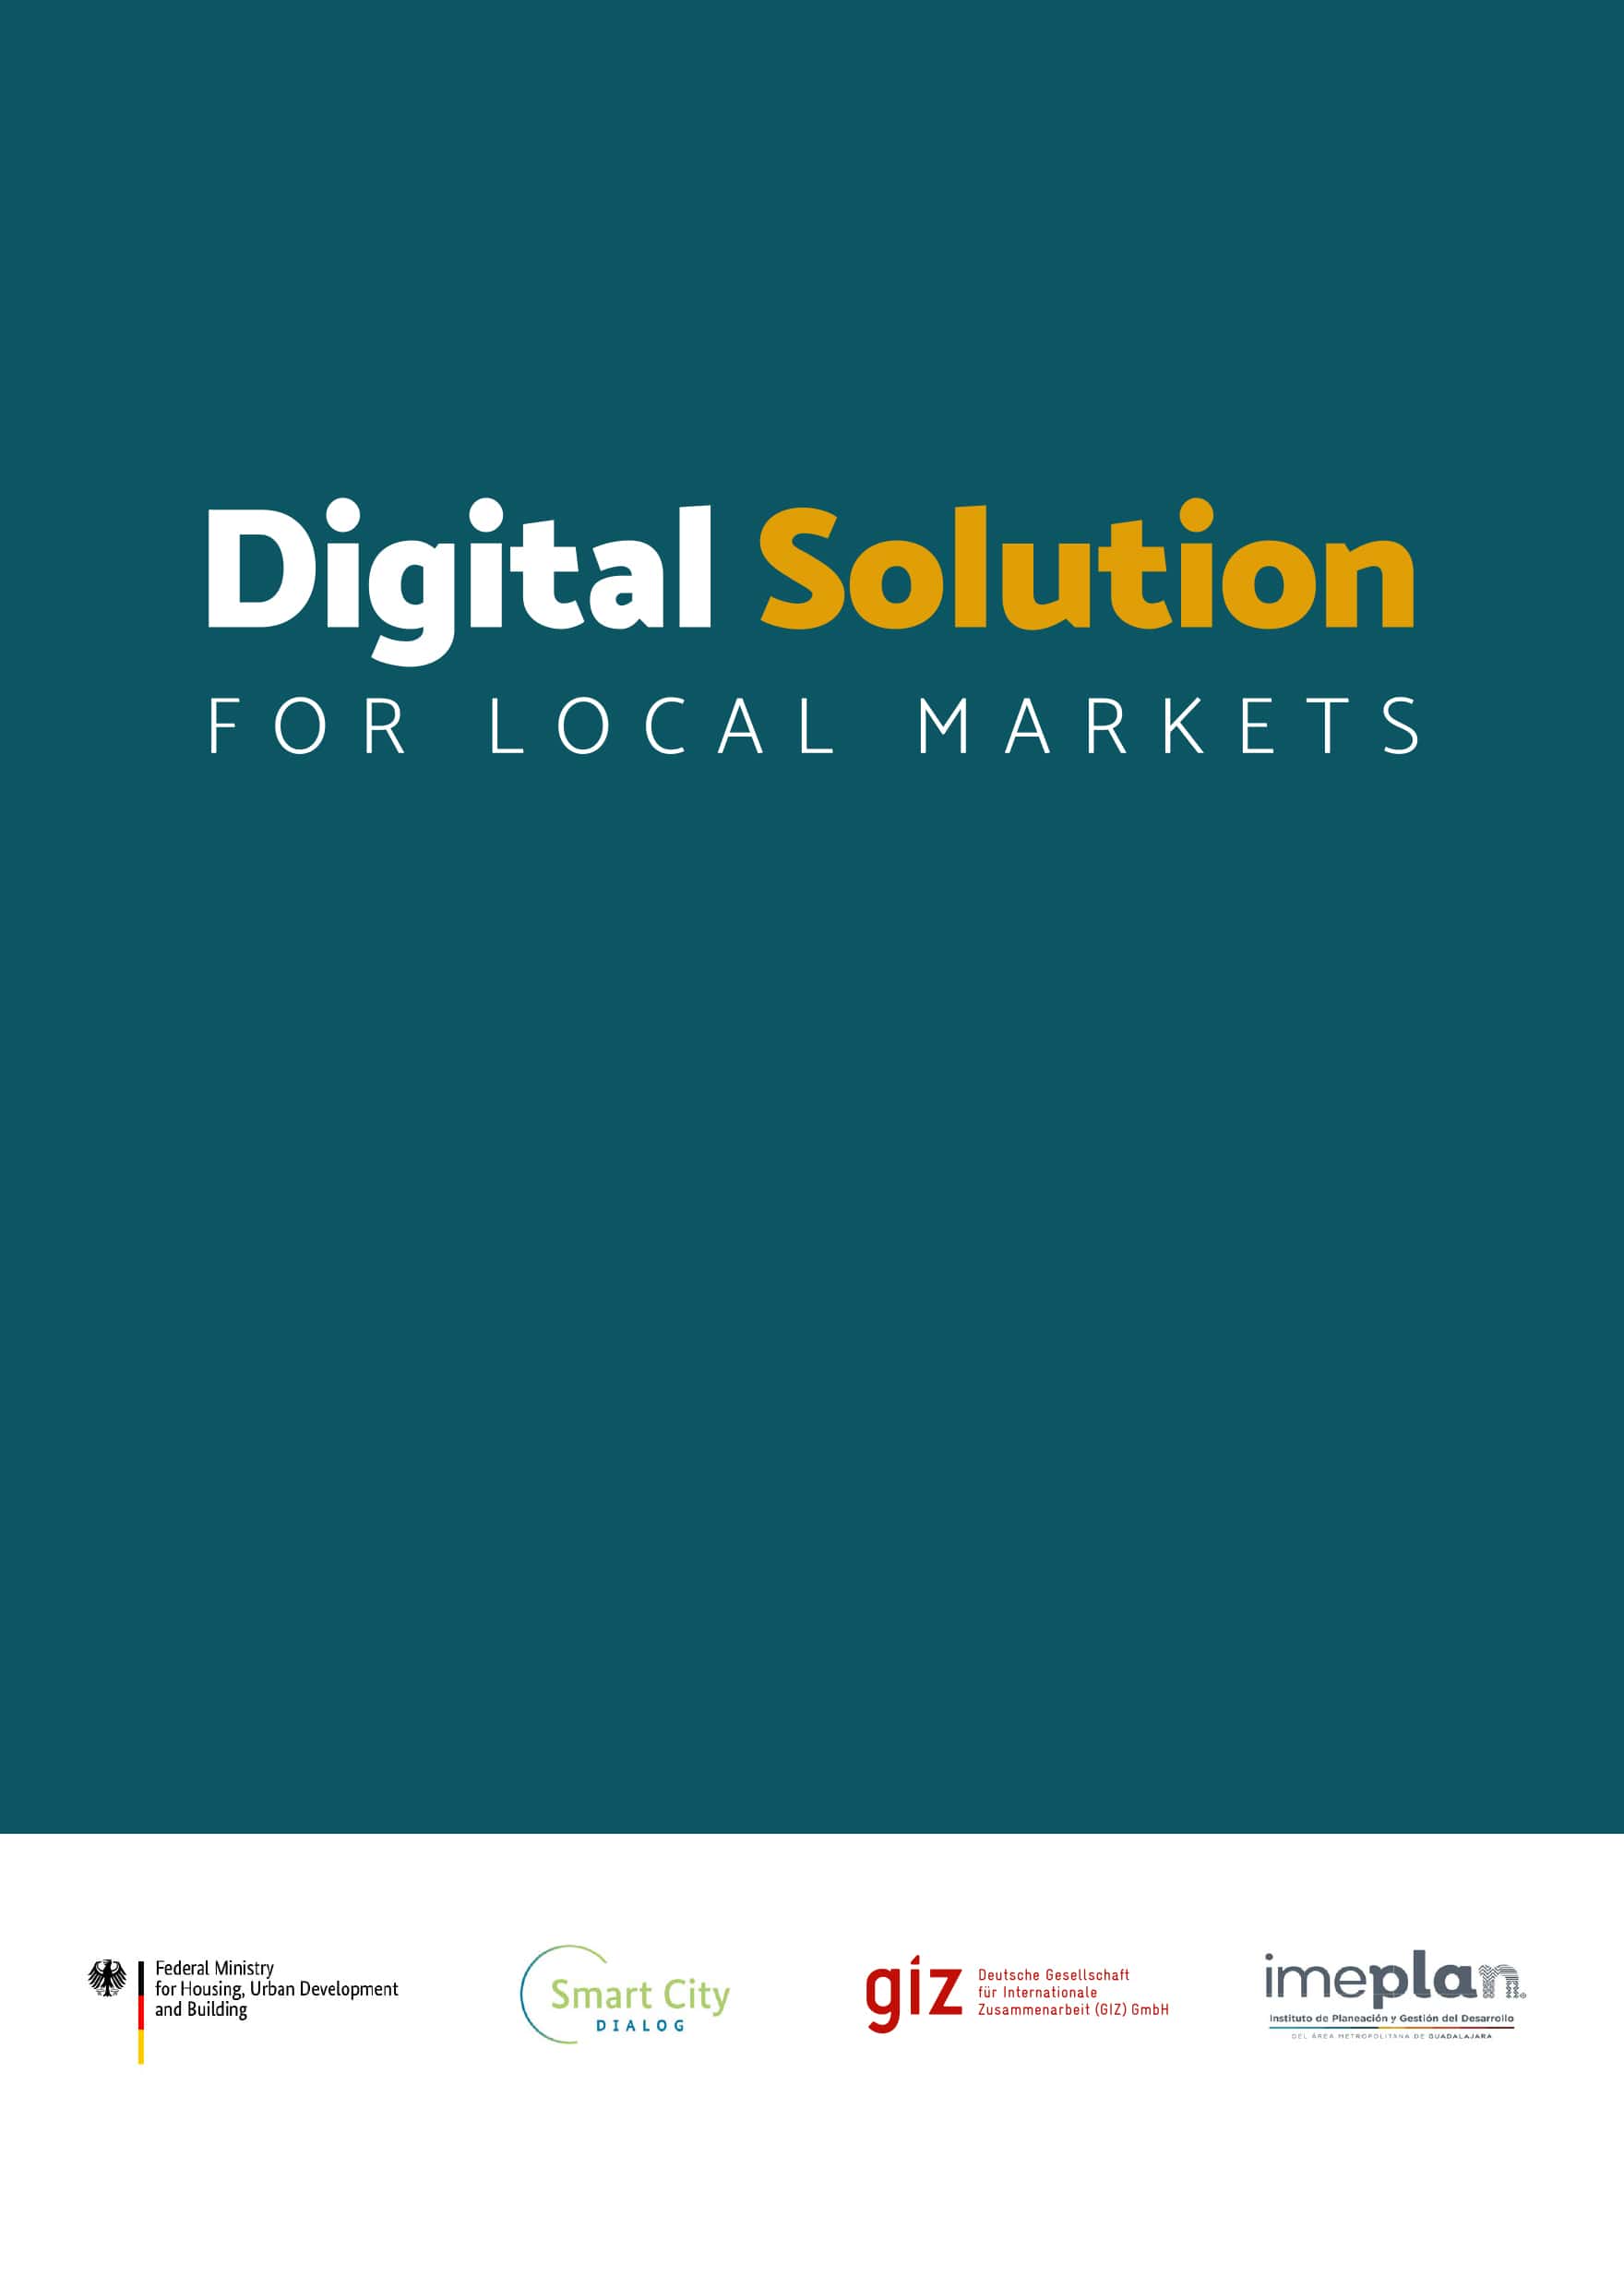 Digital Solution for Local Markets